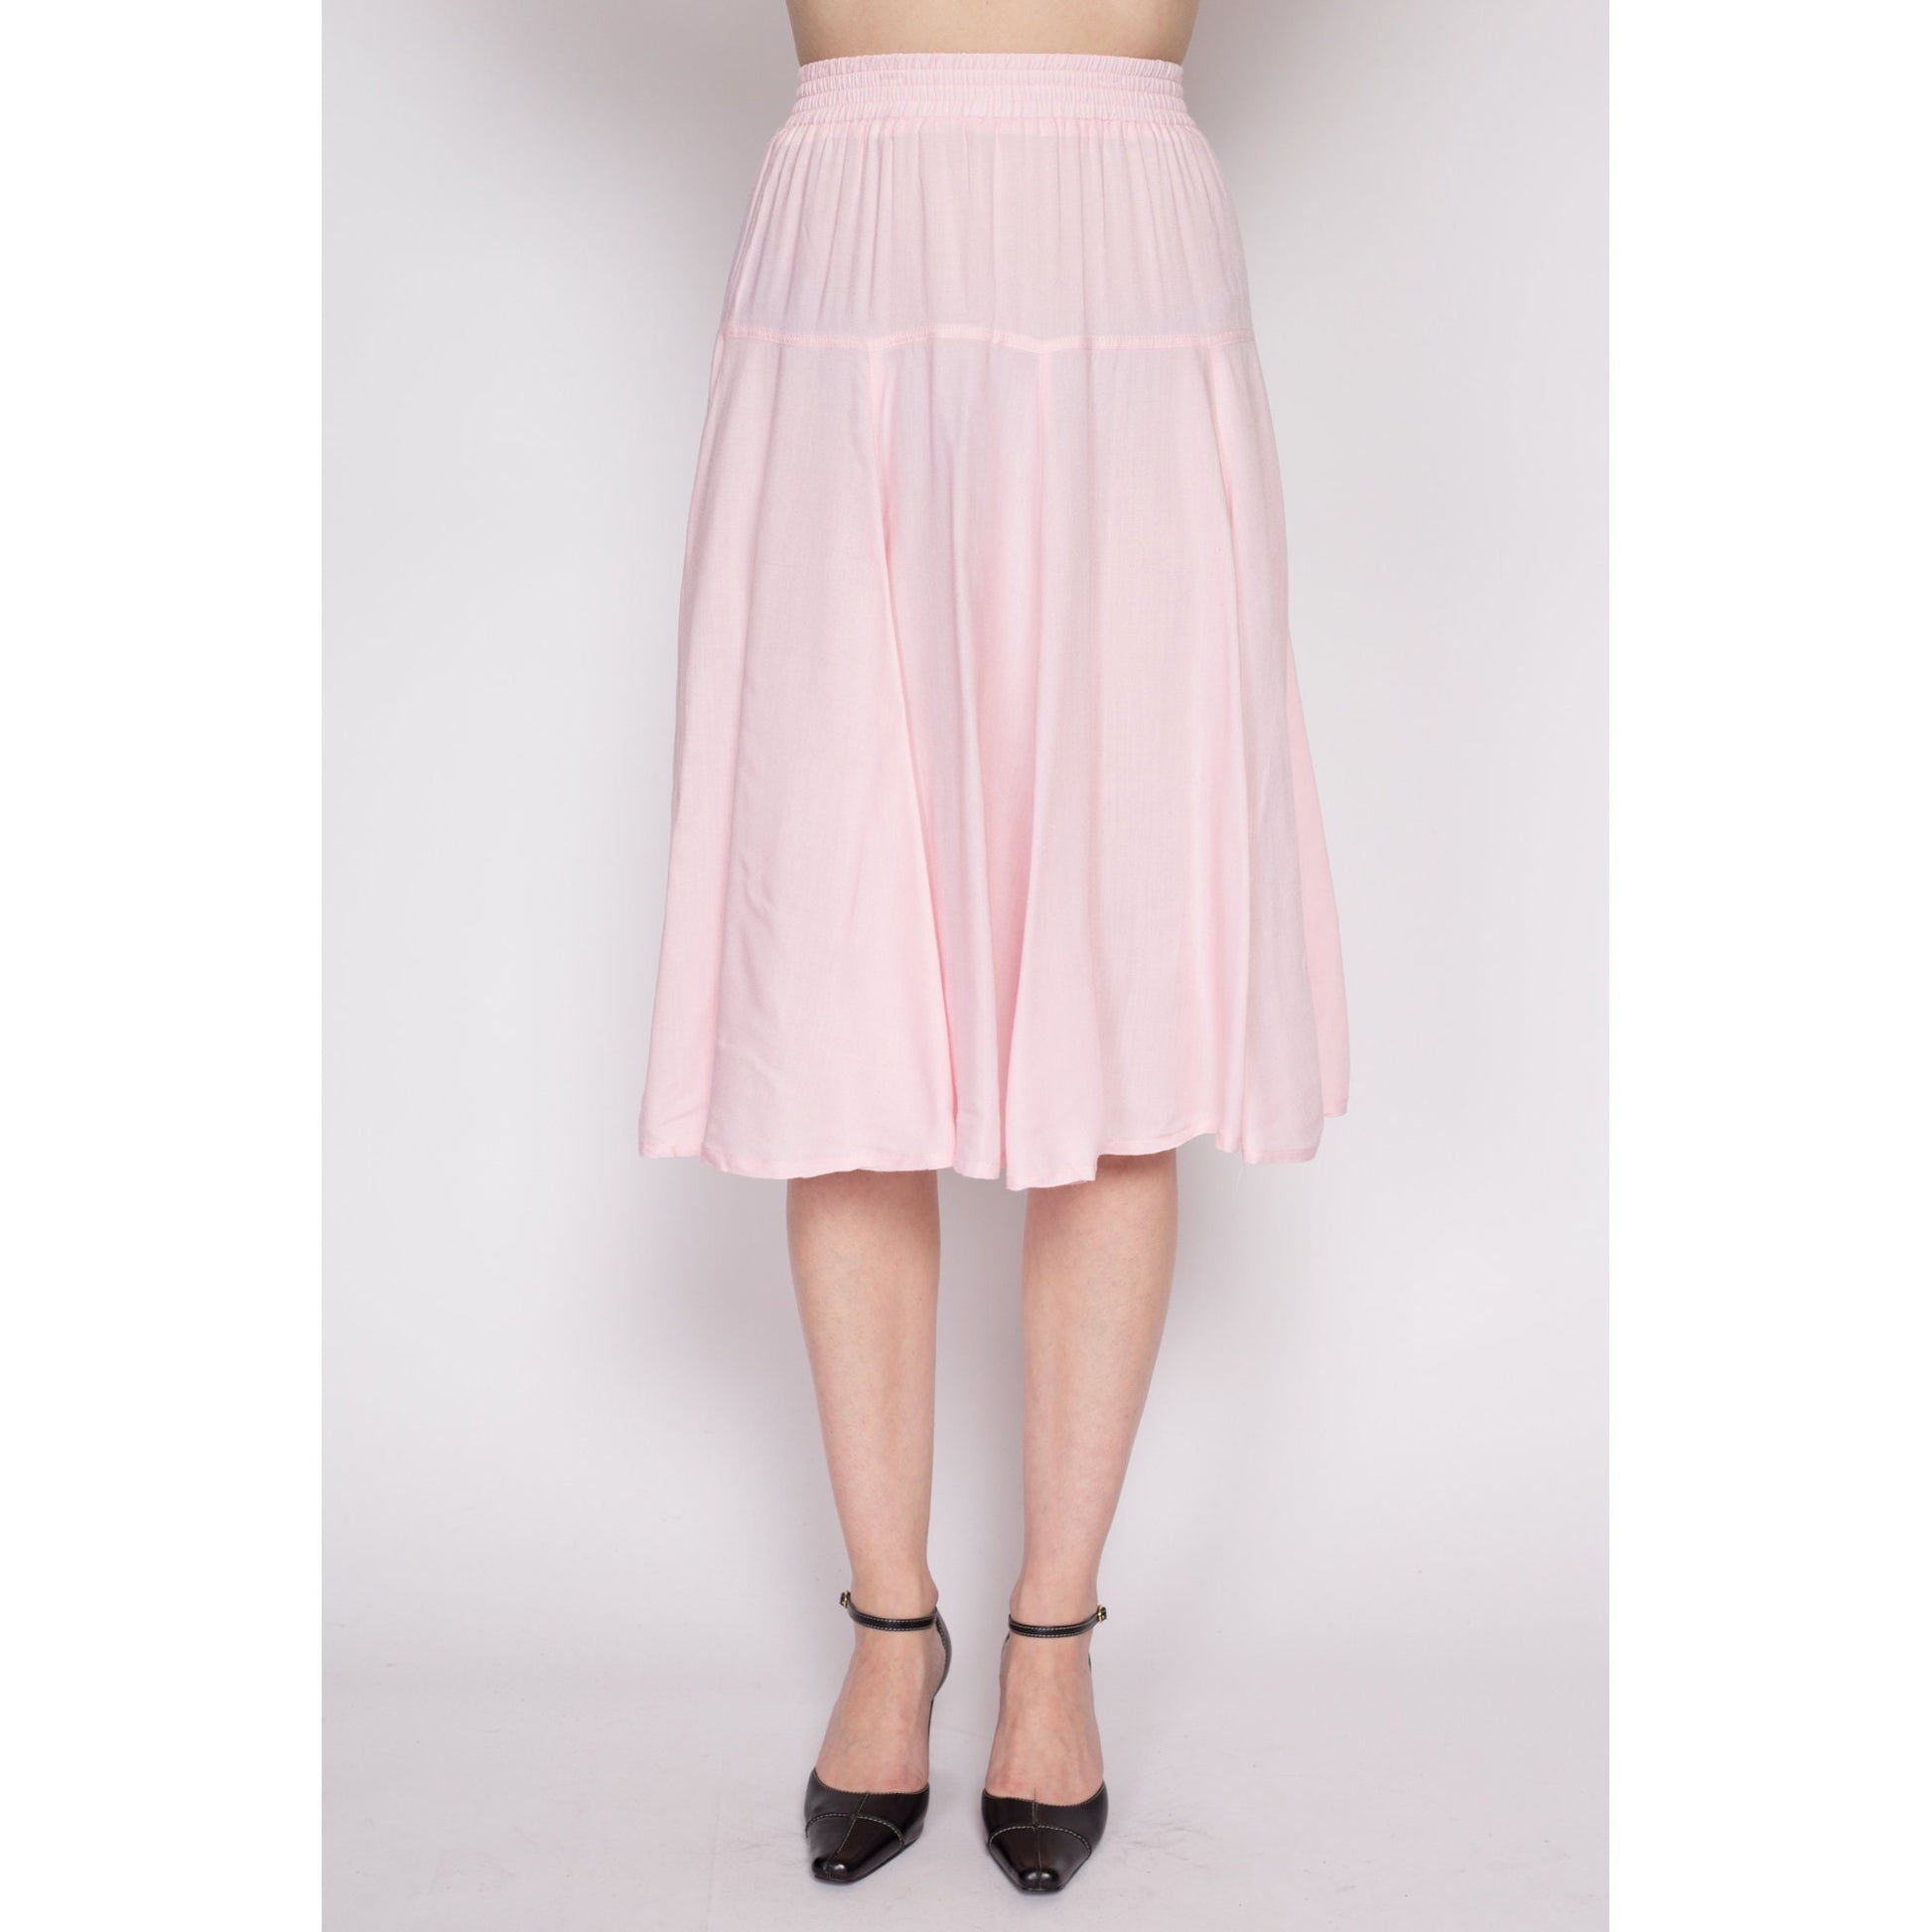 Small 80s Pastel Pink Skirt Set | Vintage Epaulette Blouse High Waist Midi Skirt Matching Two Piece Outfit